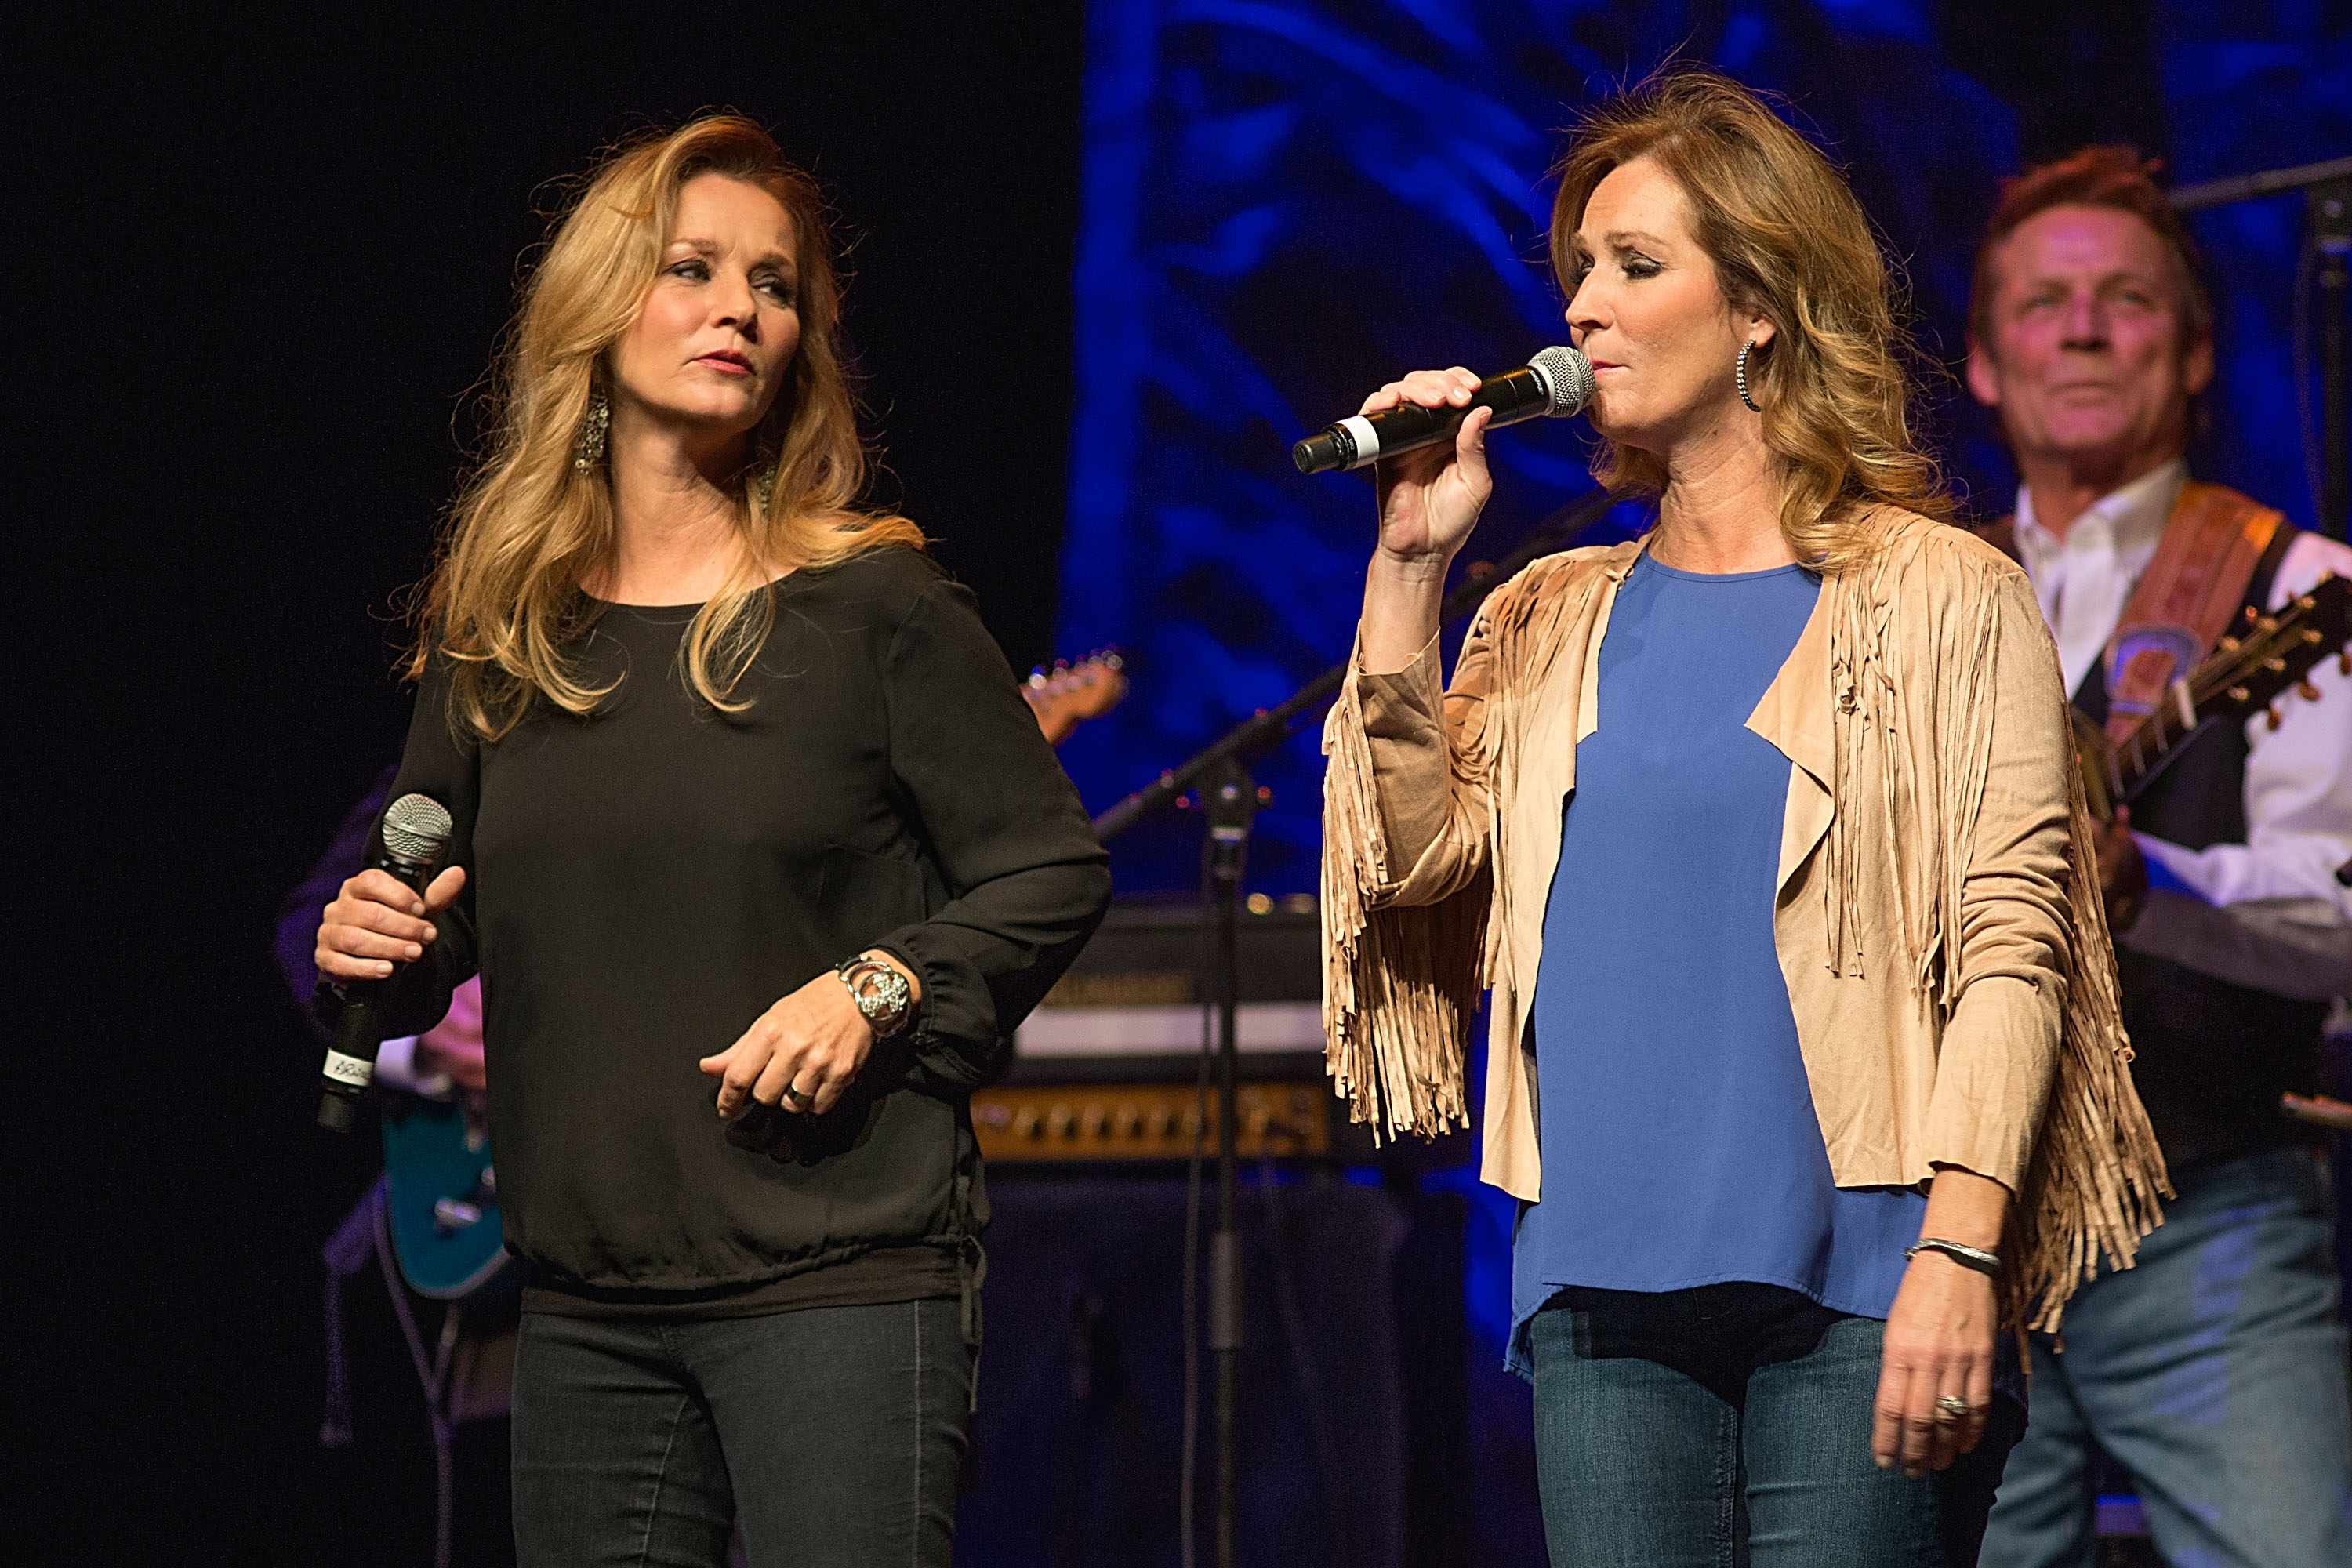 Peggy and Patsy Lynn perform in support of Loretta Lynn at ACL Live in Austin, Texas, on October 18, 2015. | Source: Getty Images